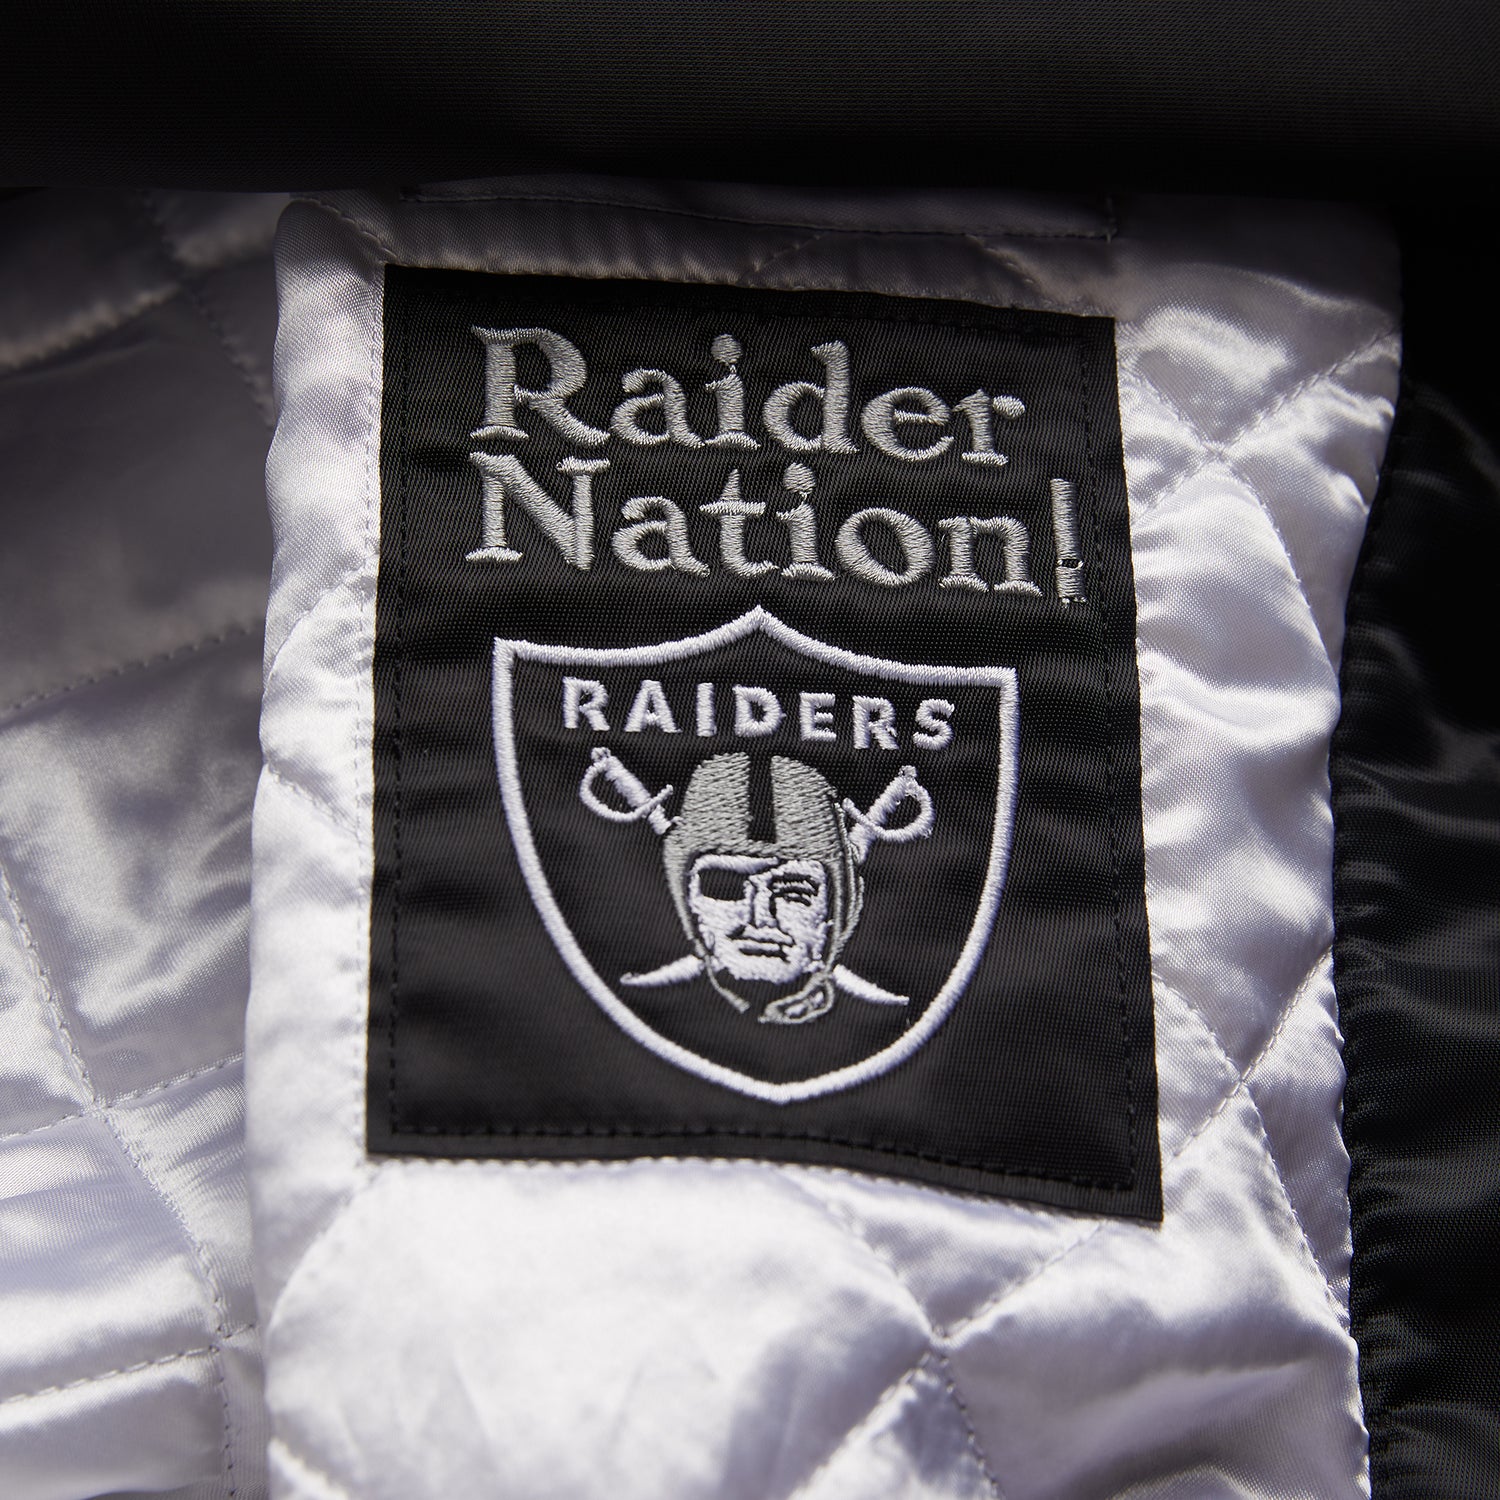 Homage x Starter Las Vegas Raiders Satin Jacket from Homage. Officially Licensed NFL Apparel. Shop Pro 80's Starter, Gameday, & Bomber Jackets.